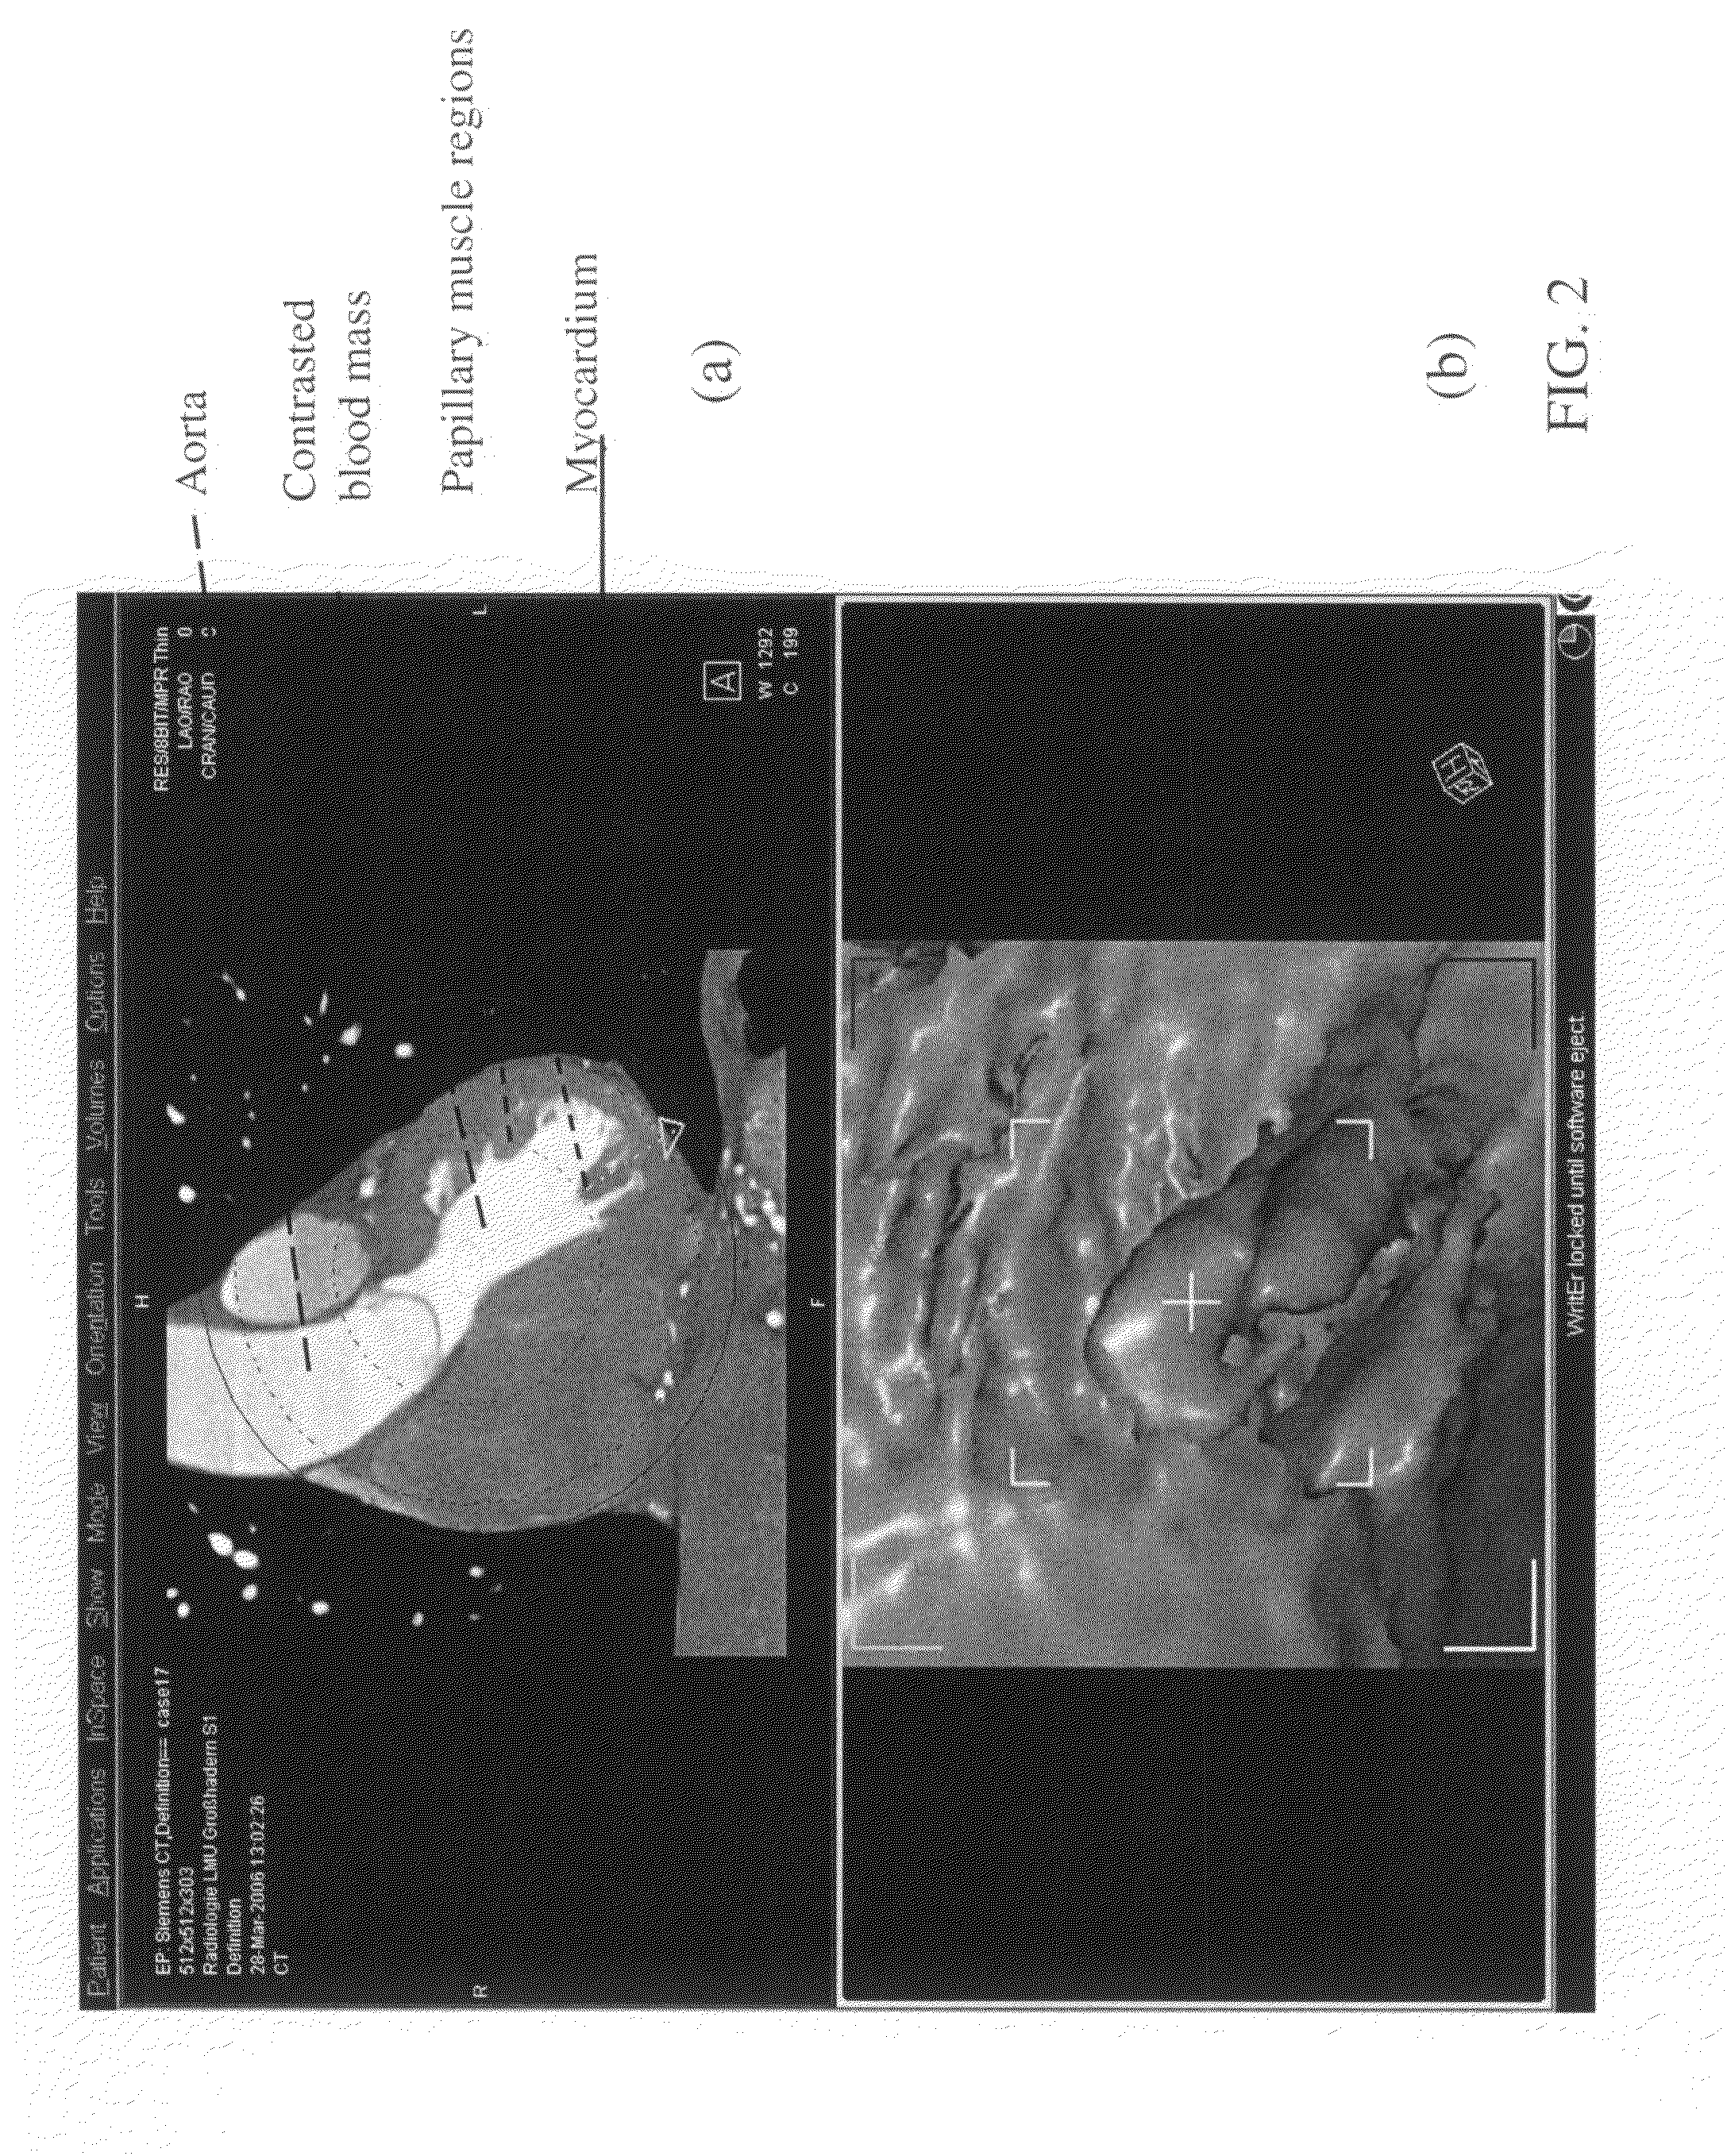 Method and system for performing ablation to treat ventricular tachycardia